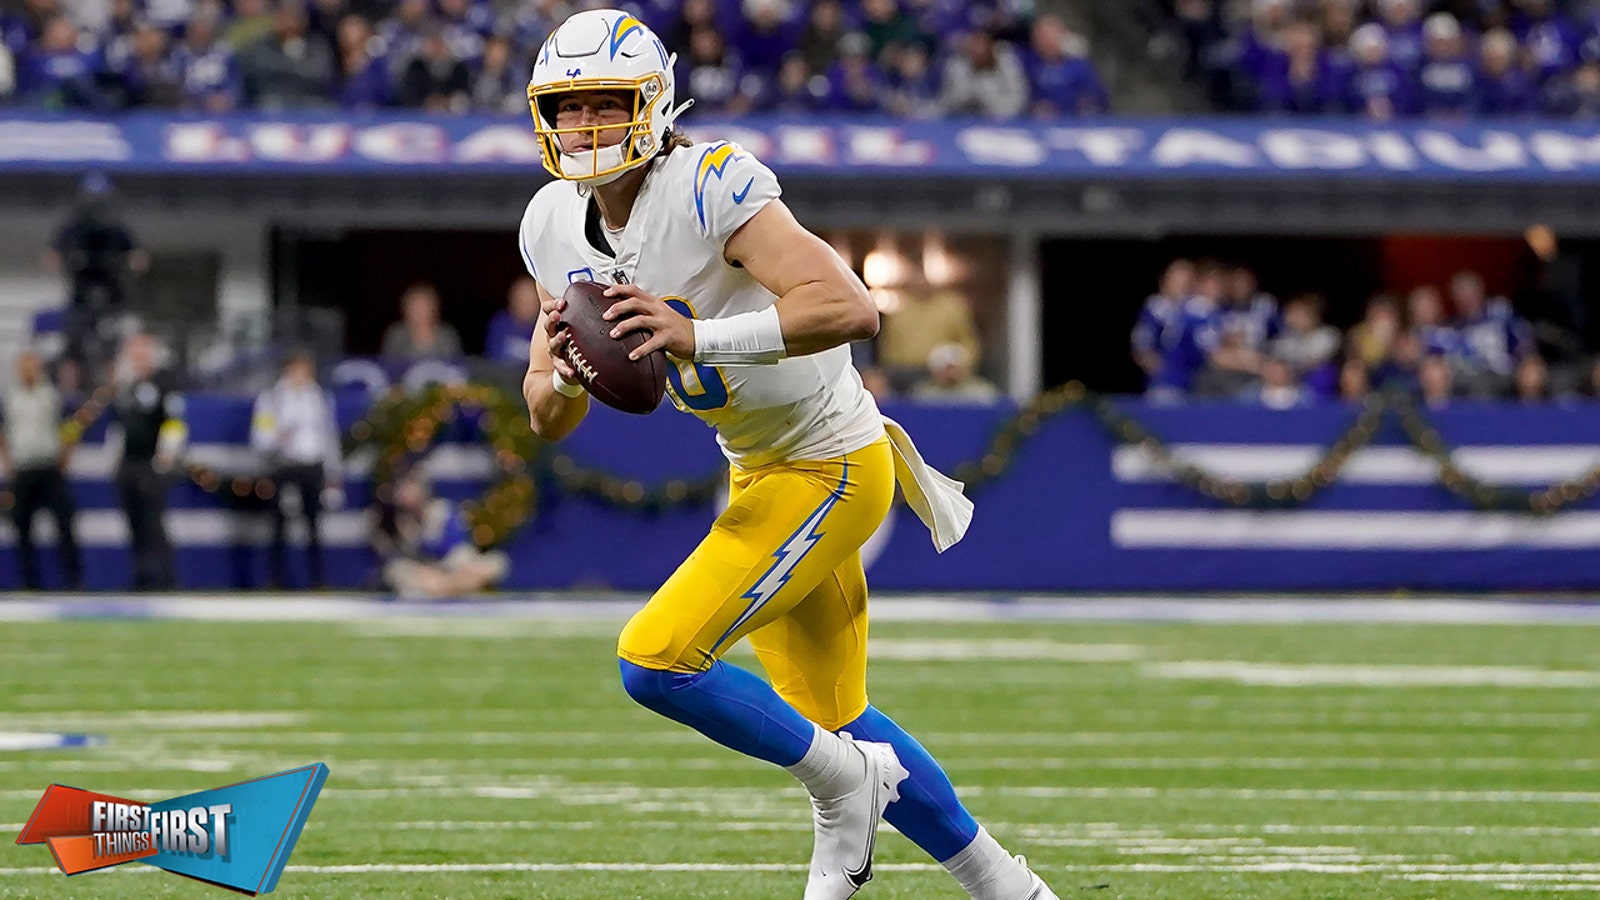 Is Justin Herbert an elite QB after leading the Chargers to the playoffs?